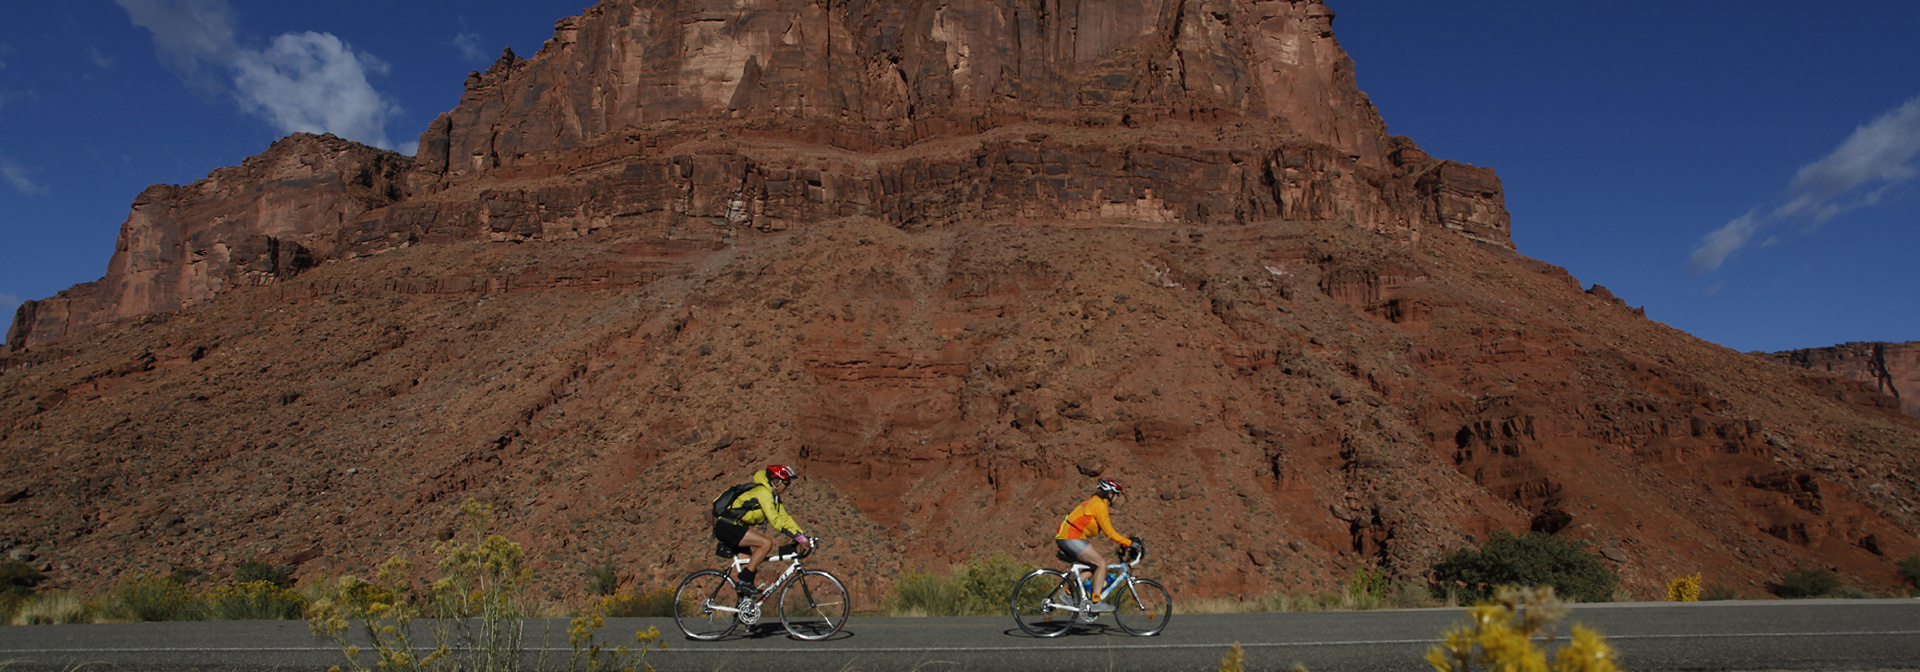 Utah Bike Tour: Moab Arches and Canyonlands